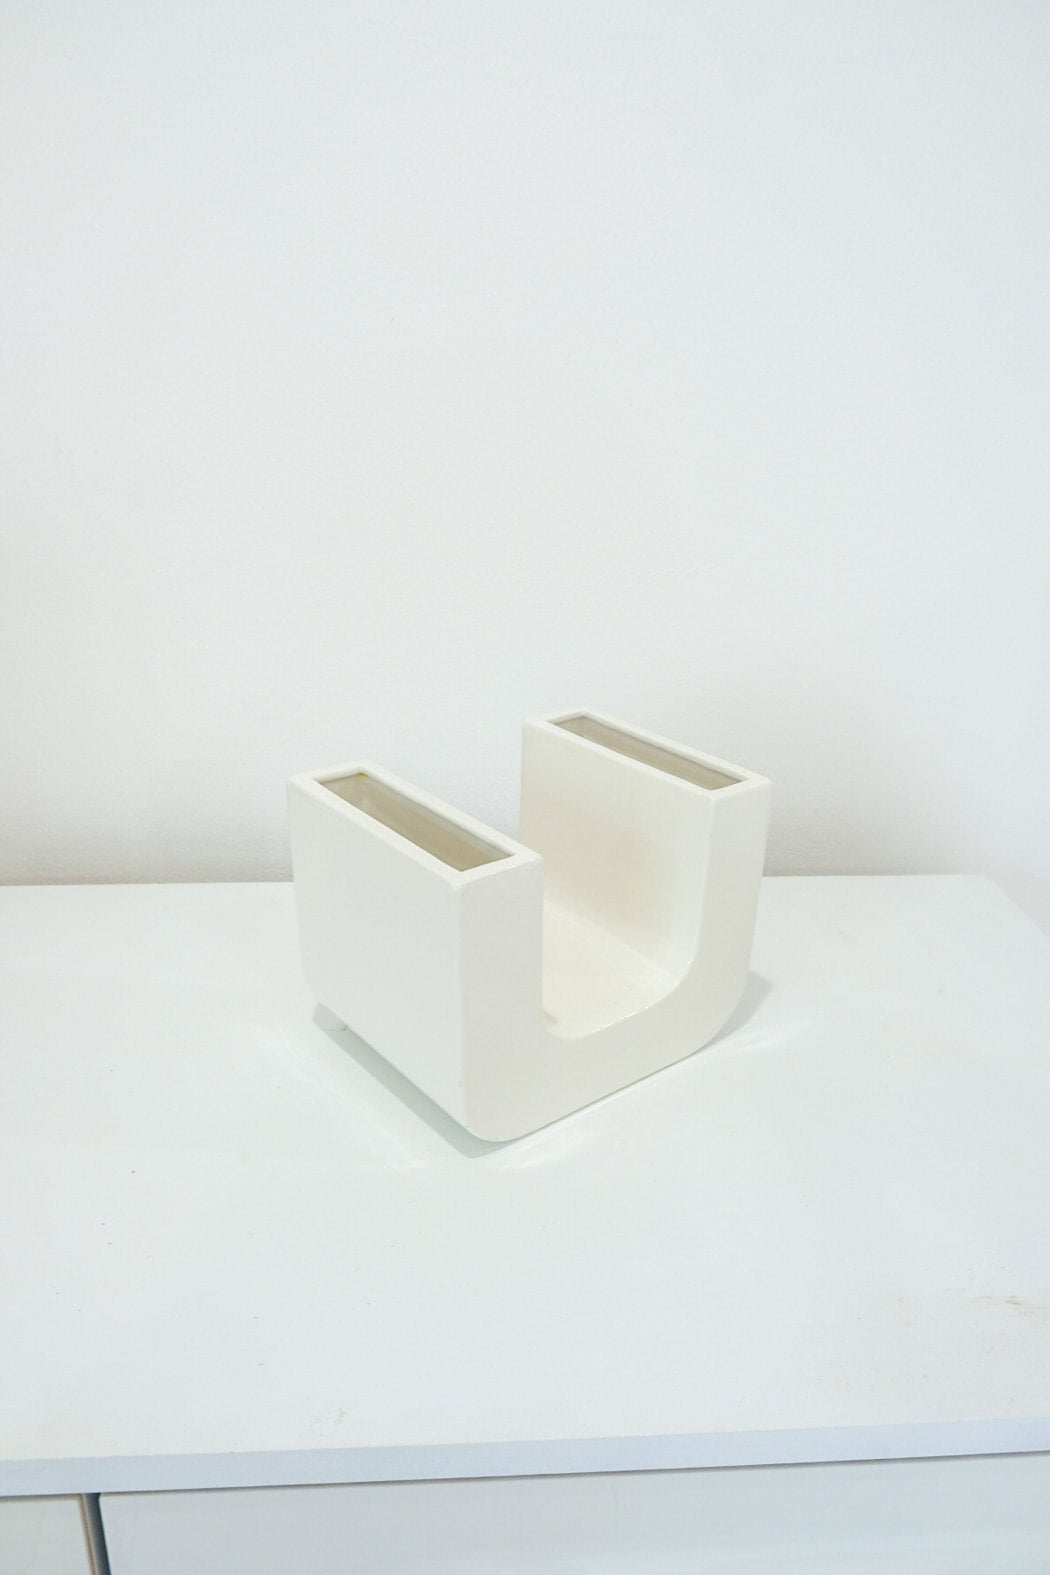 U-Shaped Vase by Dino Spagnolo for Sicart